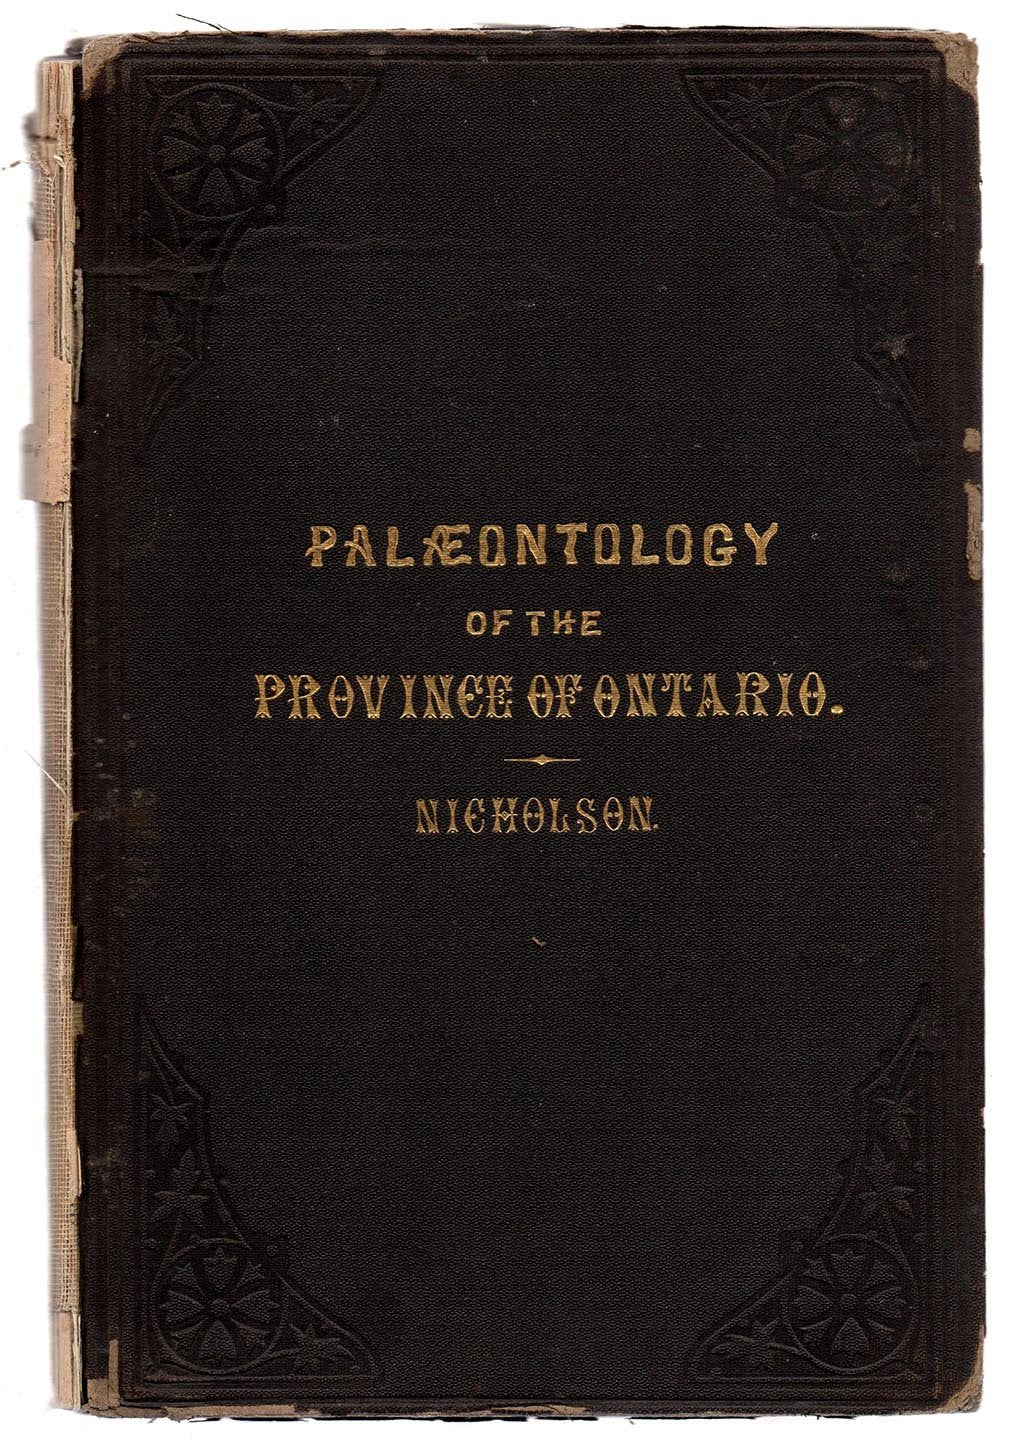 Report upon the Palaeontology of the Province of Ontario